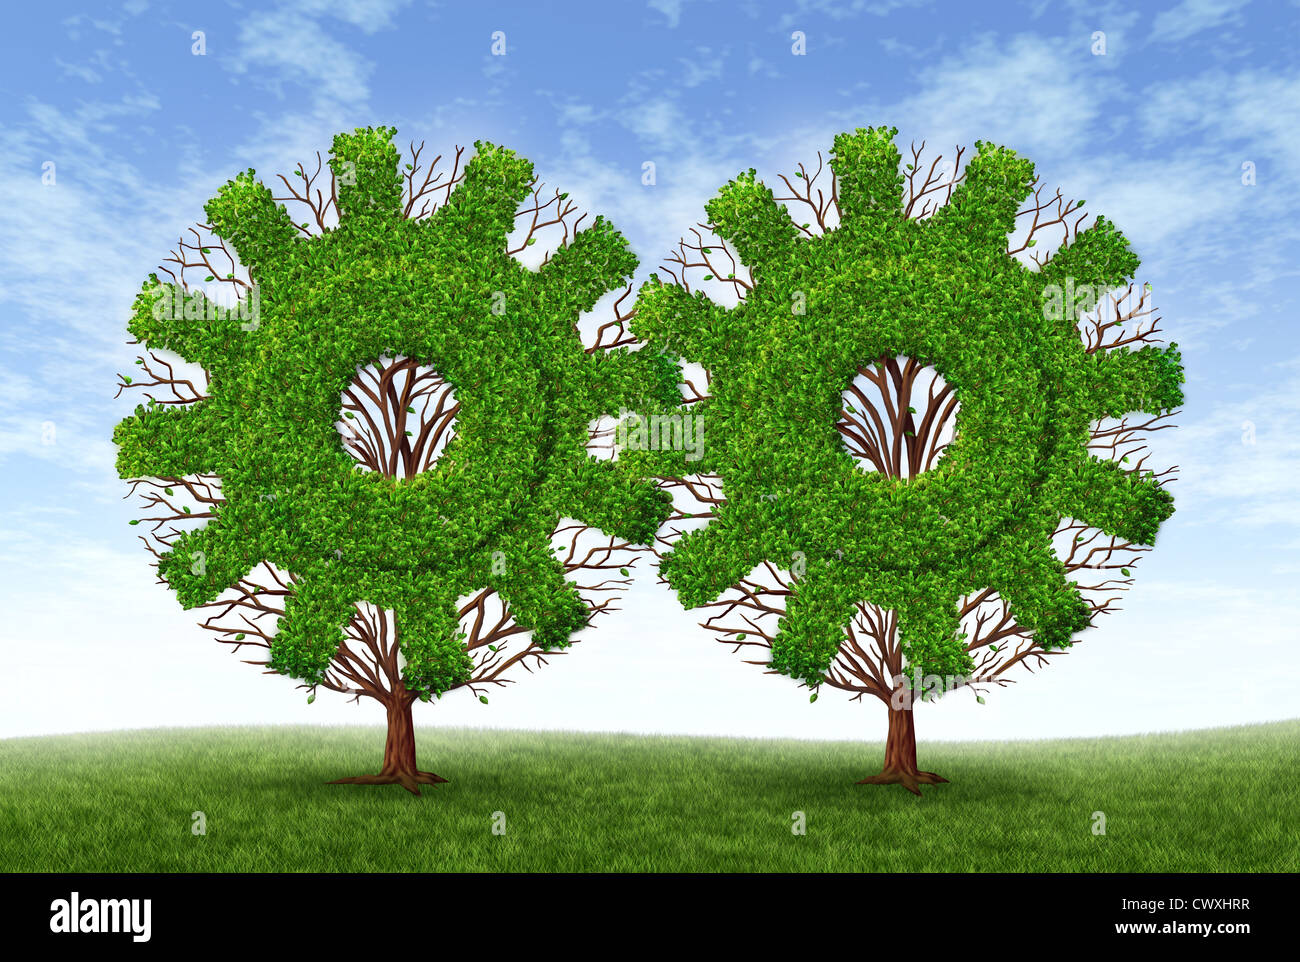 Growing business partnership and strategic alliance and financial teamwork with two trees in the shape of gears and cogs as symbols of strong conservative growth for success and future wealth on a blue sky. Stock Photo